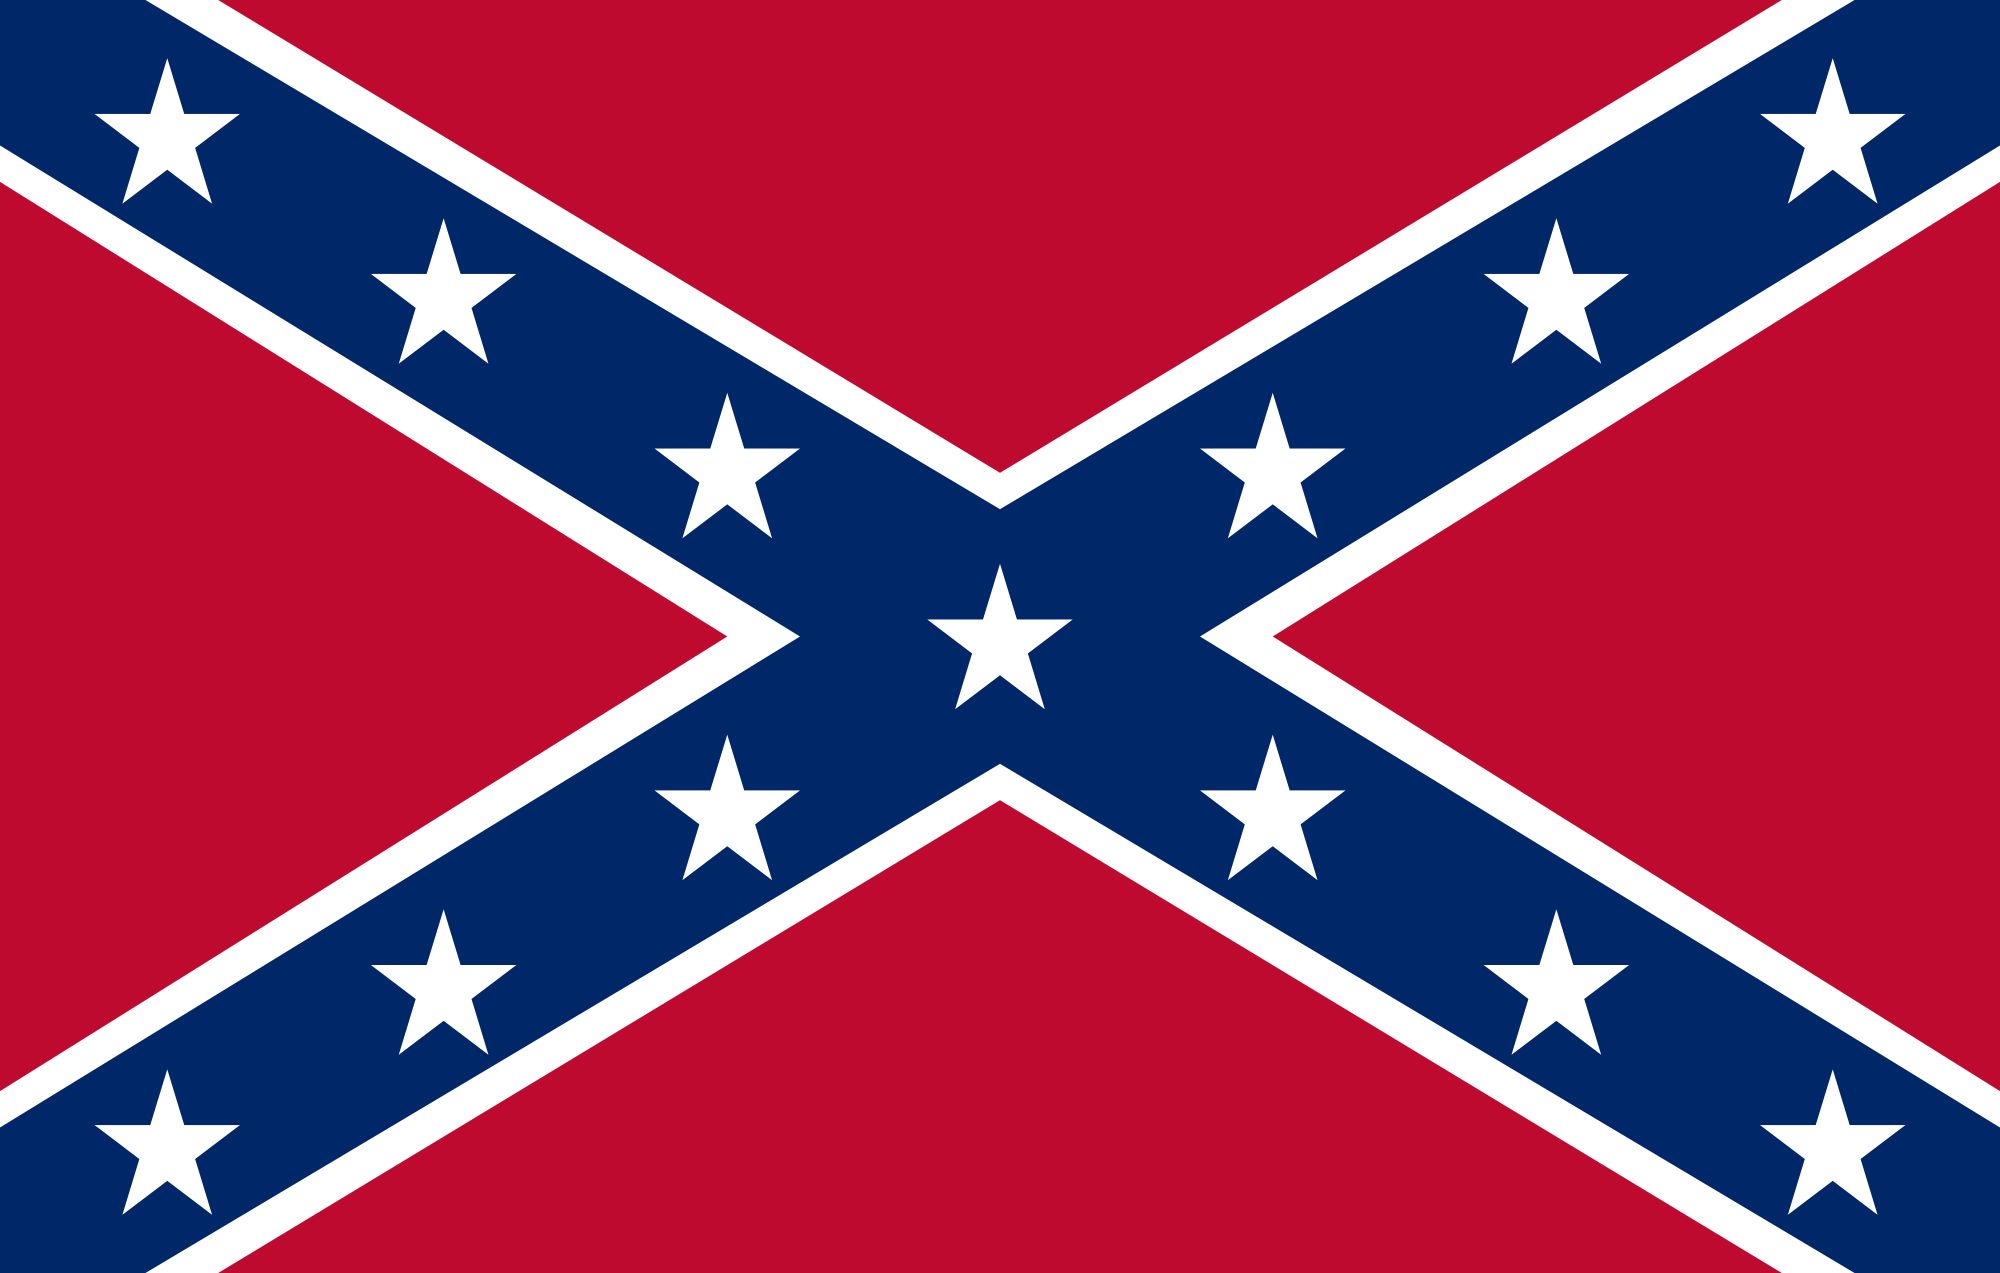 misc, flag of the confederate states of america, flags